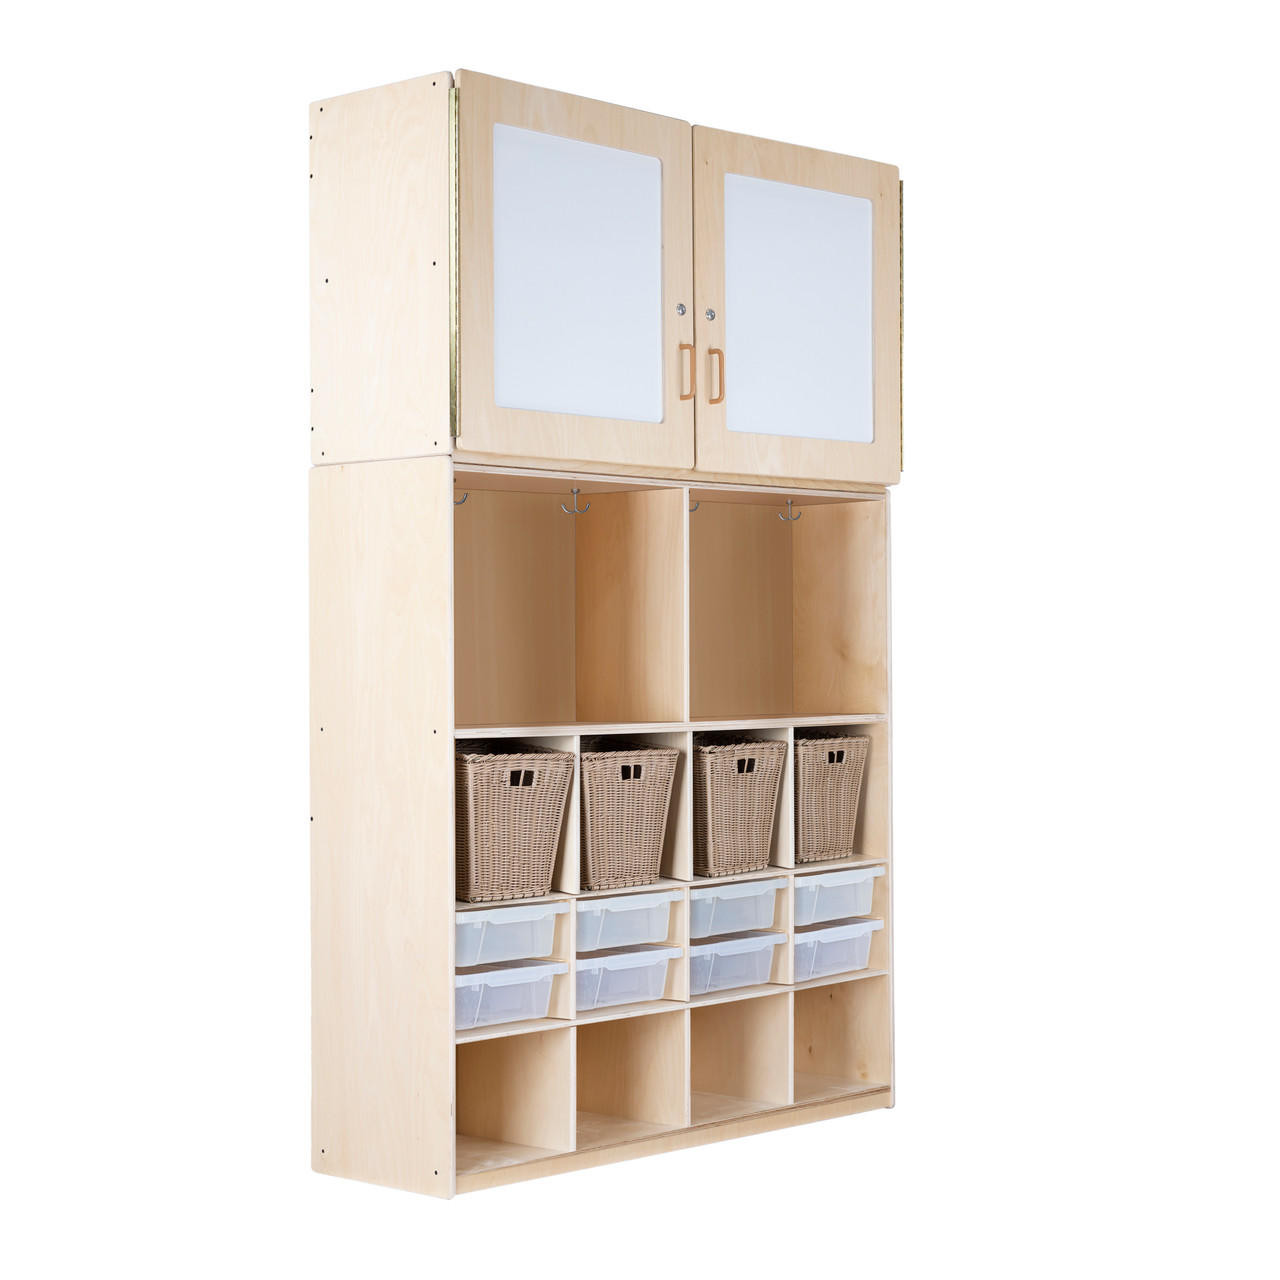 https://cdn11.bigcommerce.com/s-kd3y7/images/stencil/1280x1280/products/2503/57701/wood-designs-the-classroom-organizer-with-locking-cabinet-and-two-undivided-backpack-storage-sections__00065.1687362987.jpg?c=2